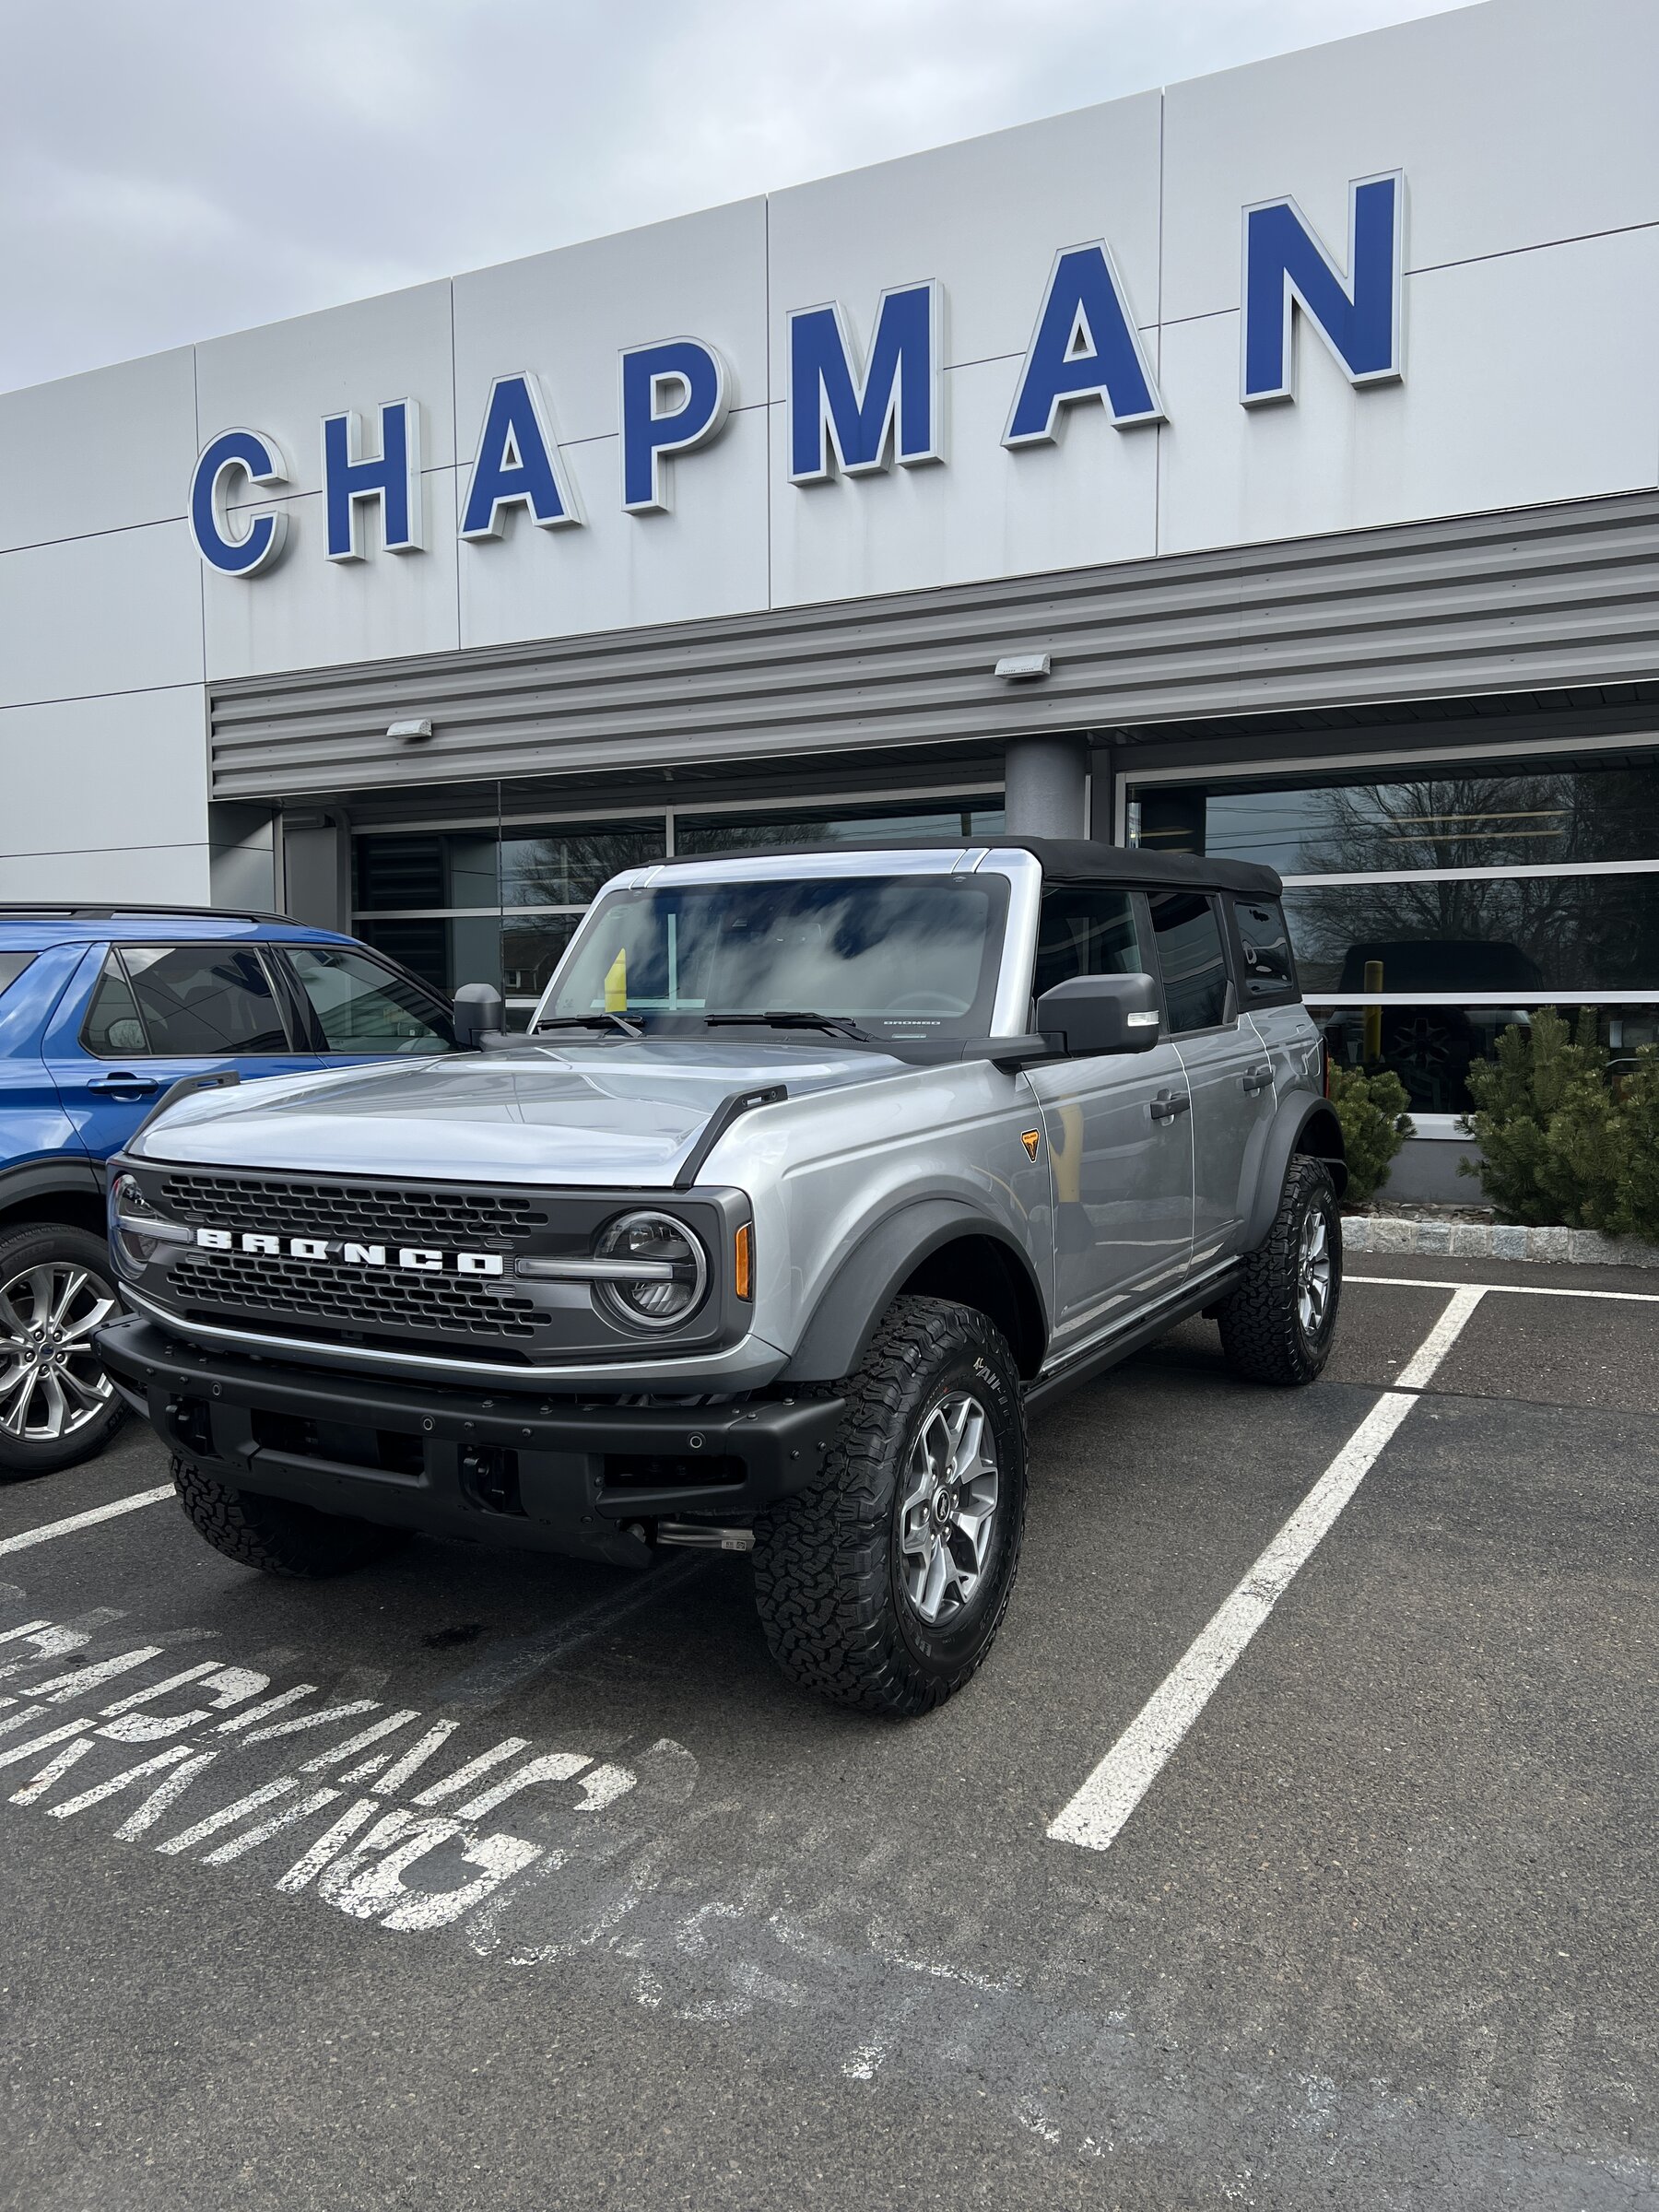 Ford Bronco Chapman Of Horsham with @dealerinsider 136823B3-A57A-4AD9-B12D-3A85367CE6BB